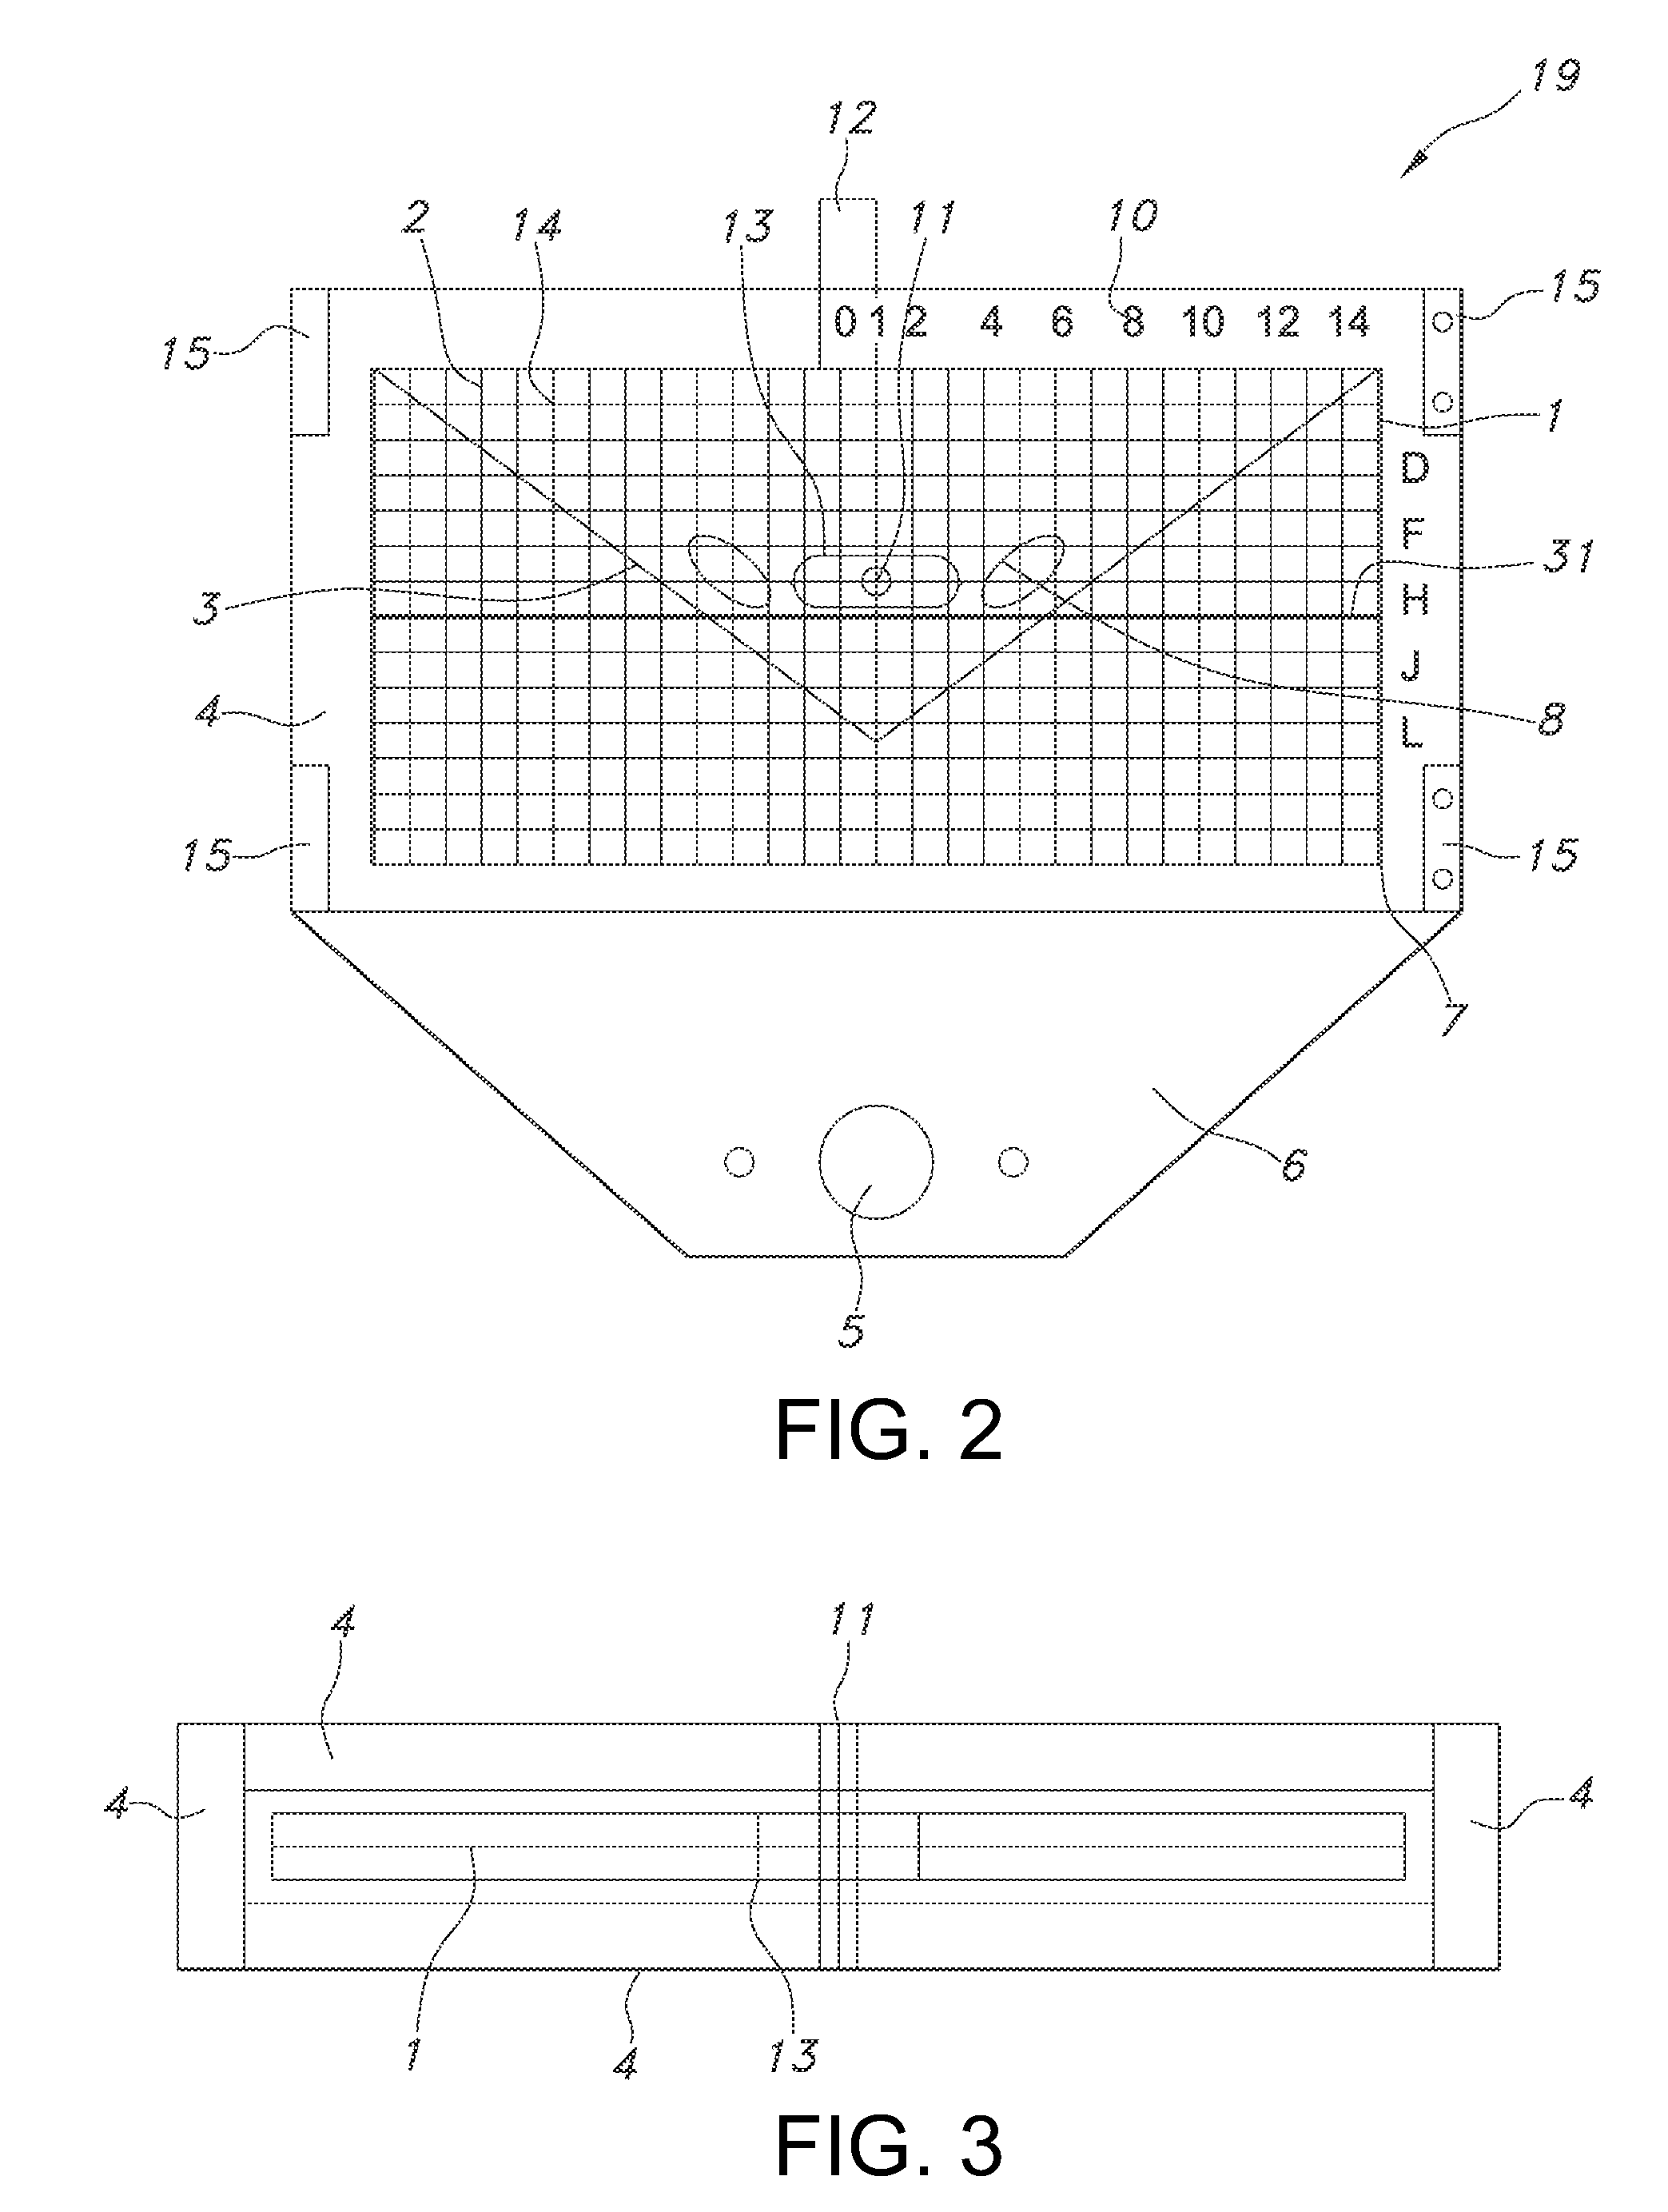 Alignment plate apparatus and system and method of use